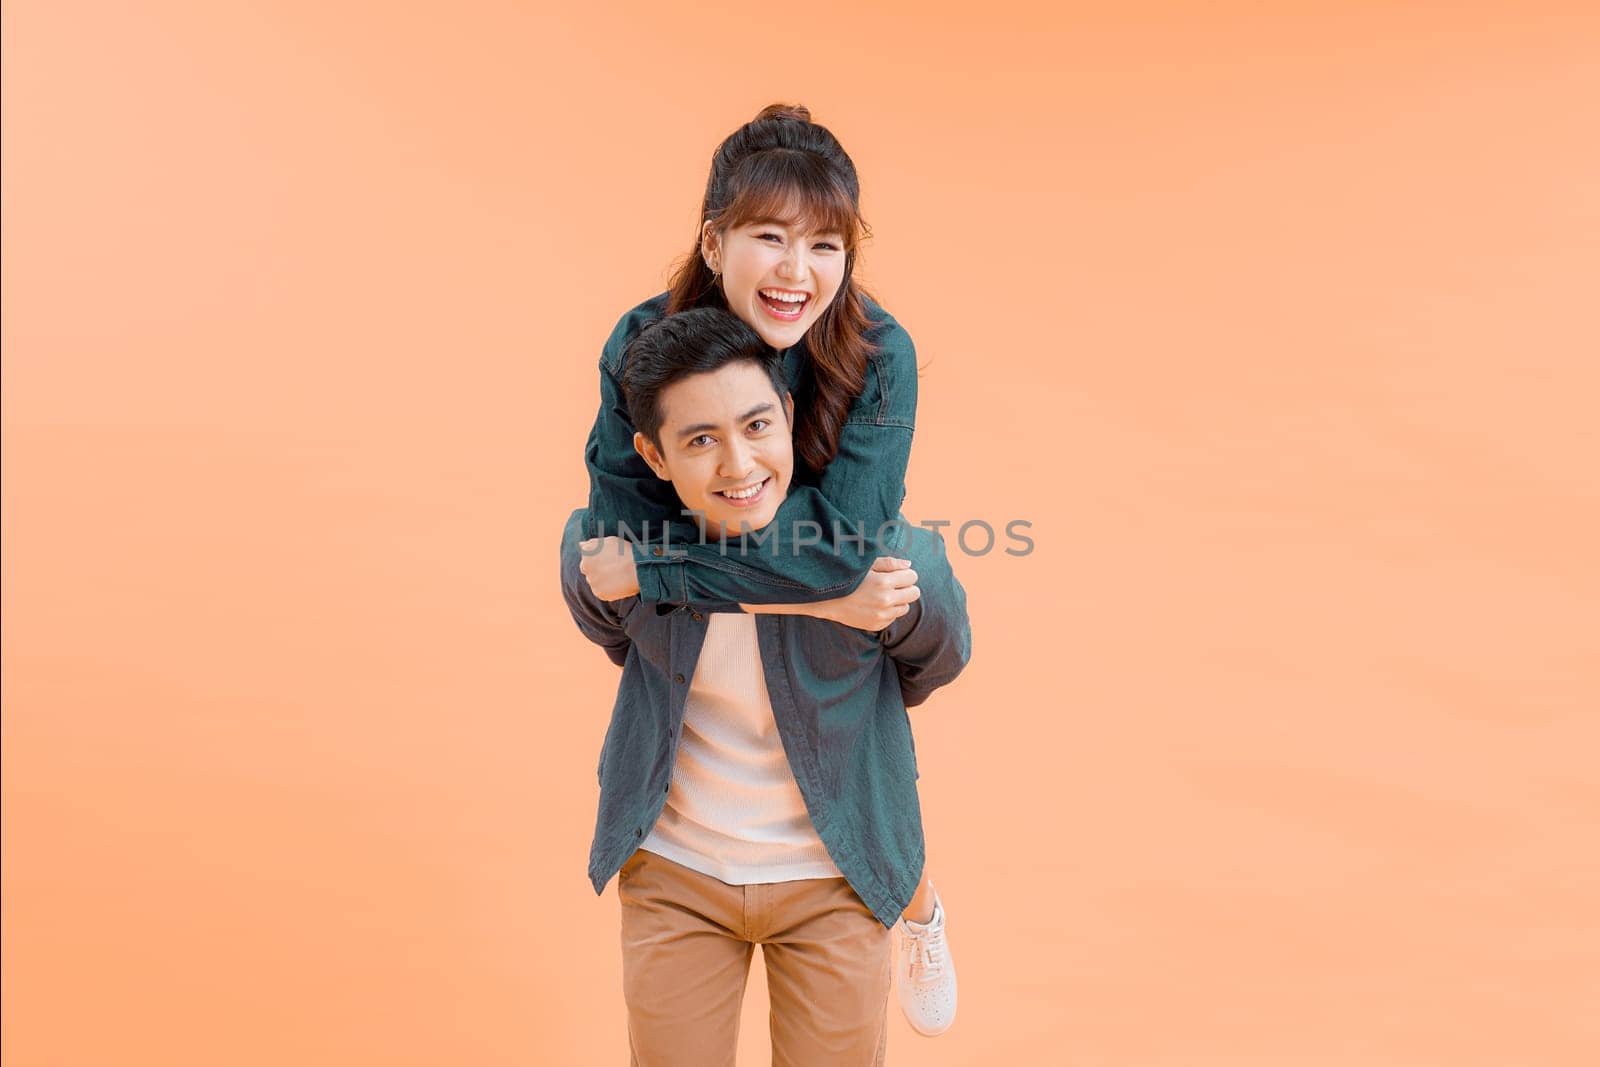 Handsome man giving piggy back to his girlfriend on color background